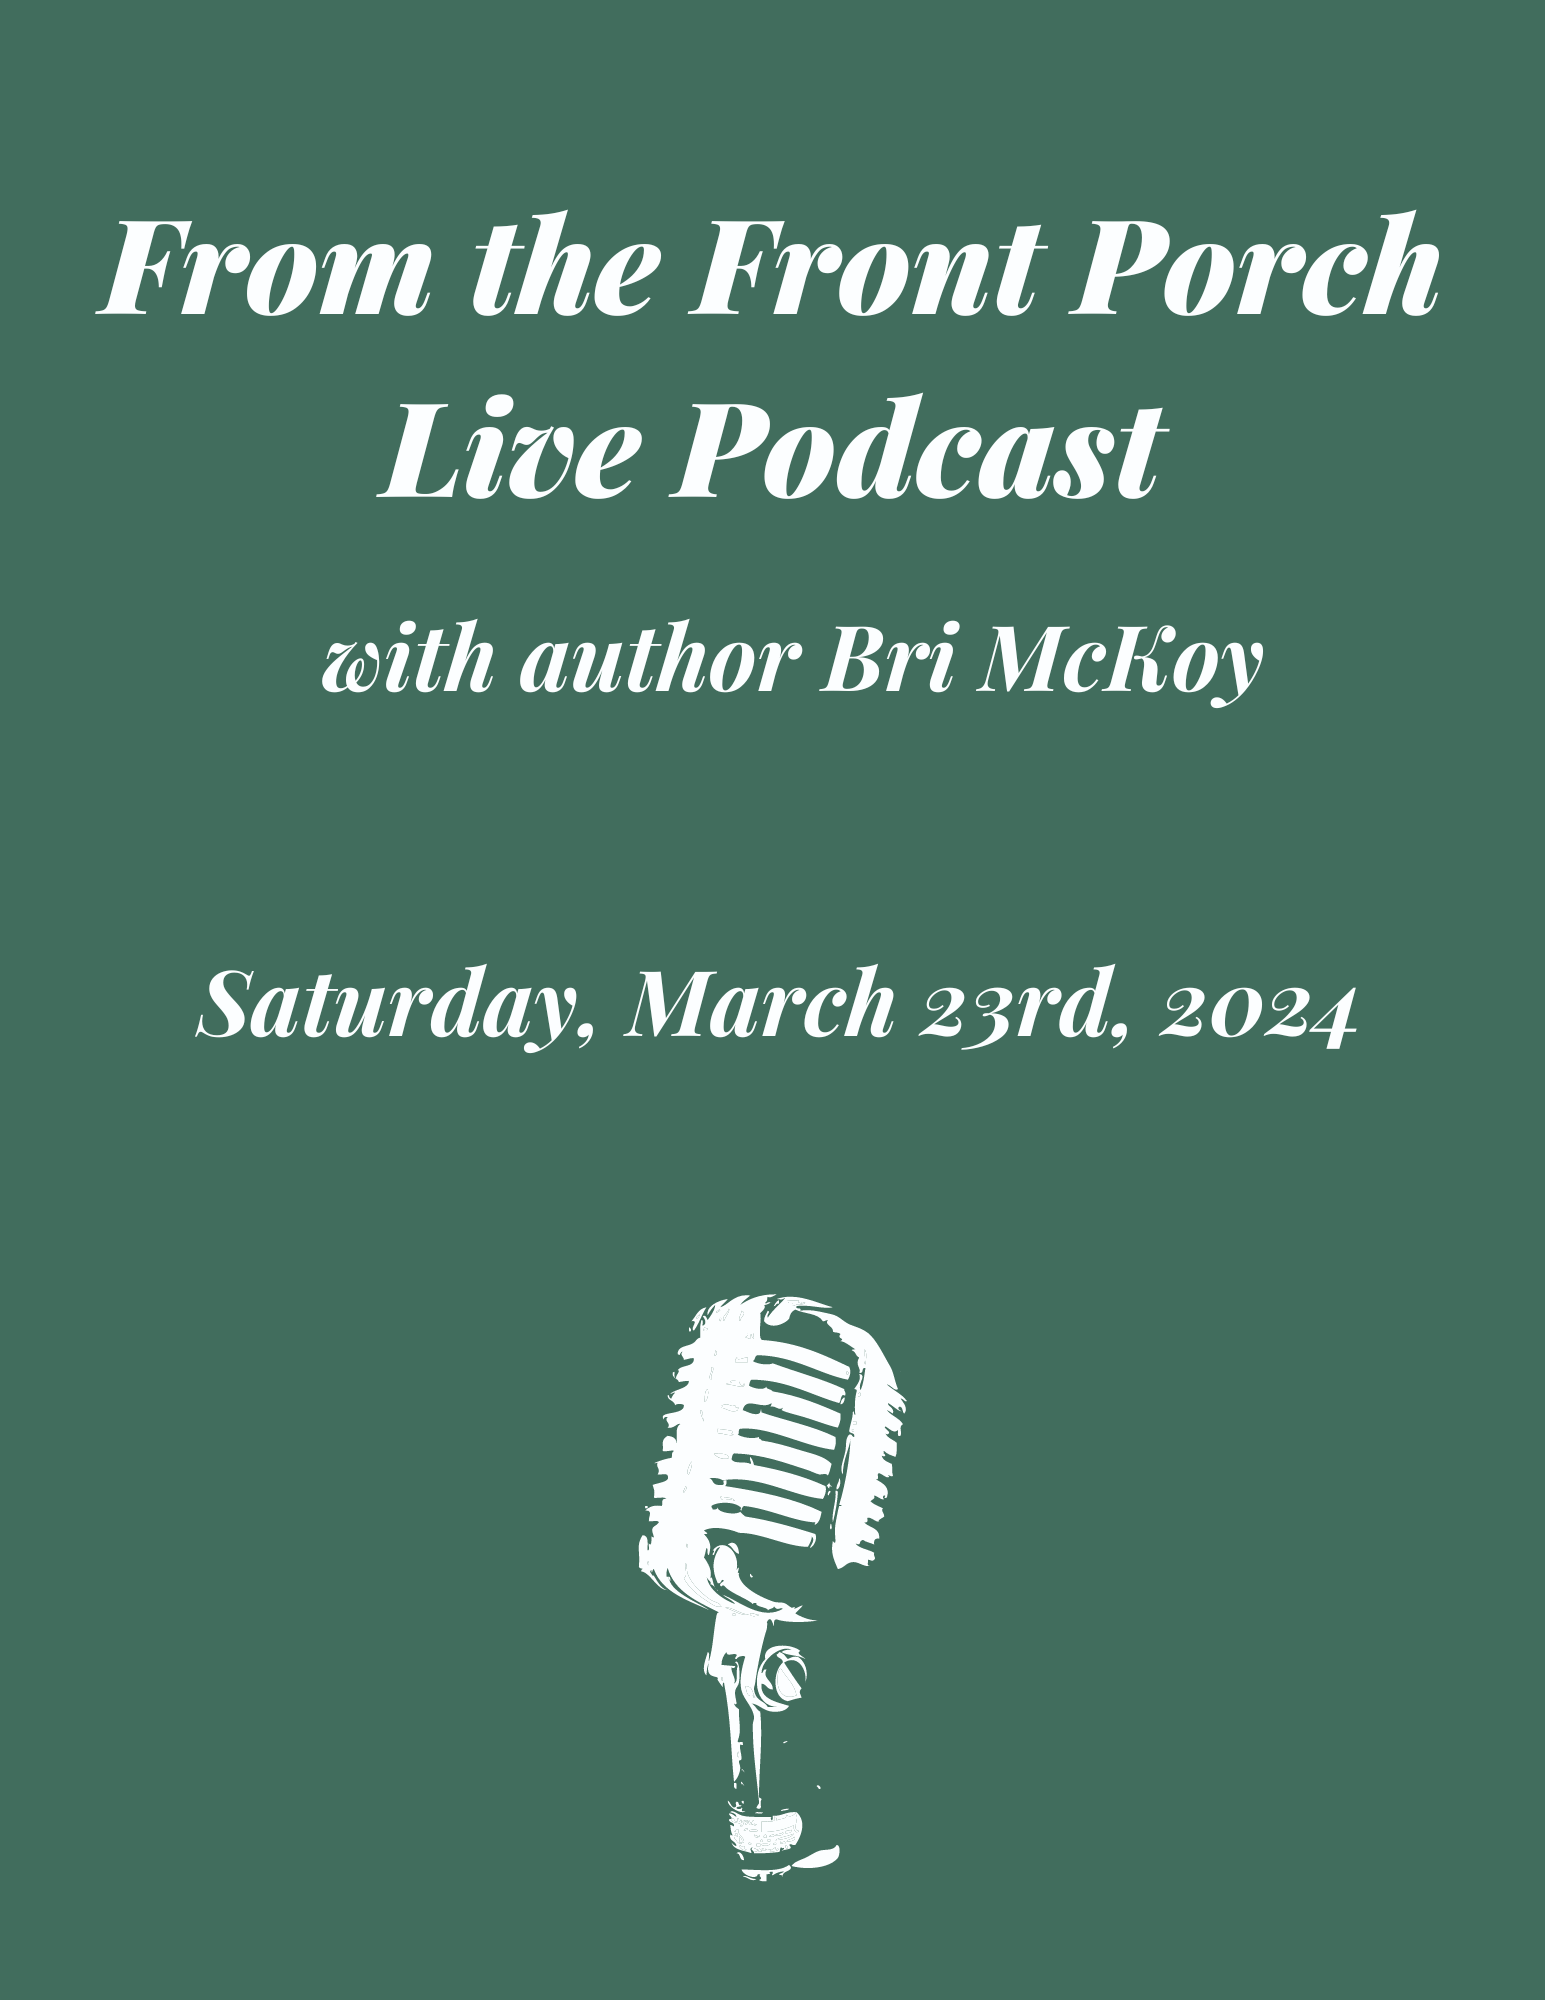 From the Front Porch Live Podcast